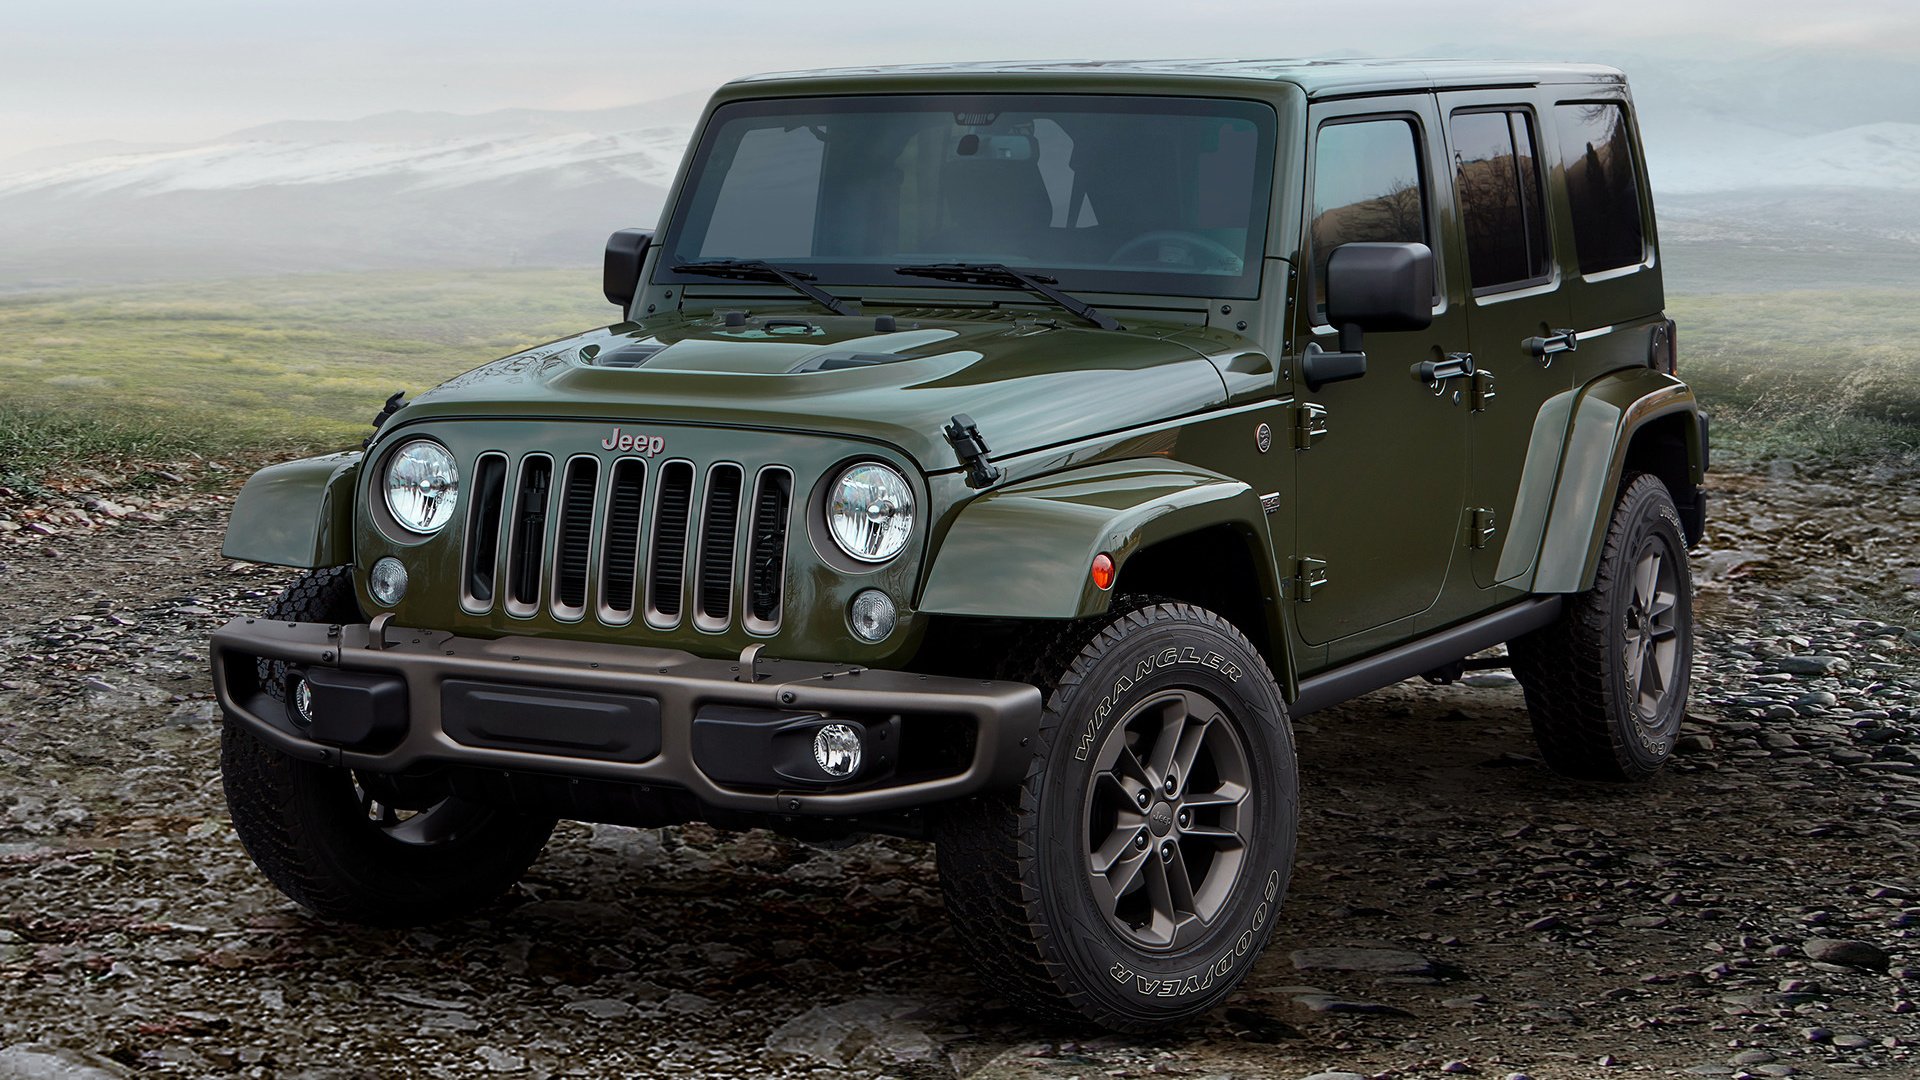 2016 Jeep Wrangler Unlimited 75th Anniversary Hd Wallpaper Background Image 1920x1080